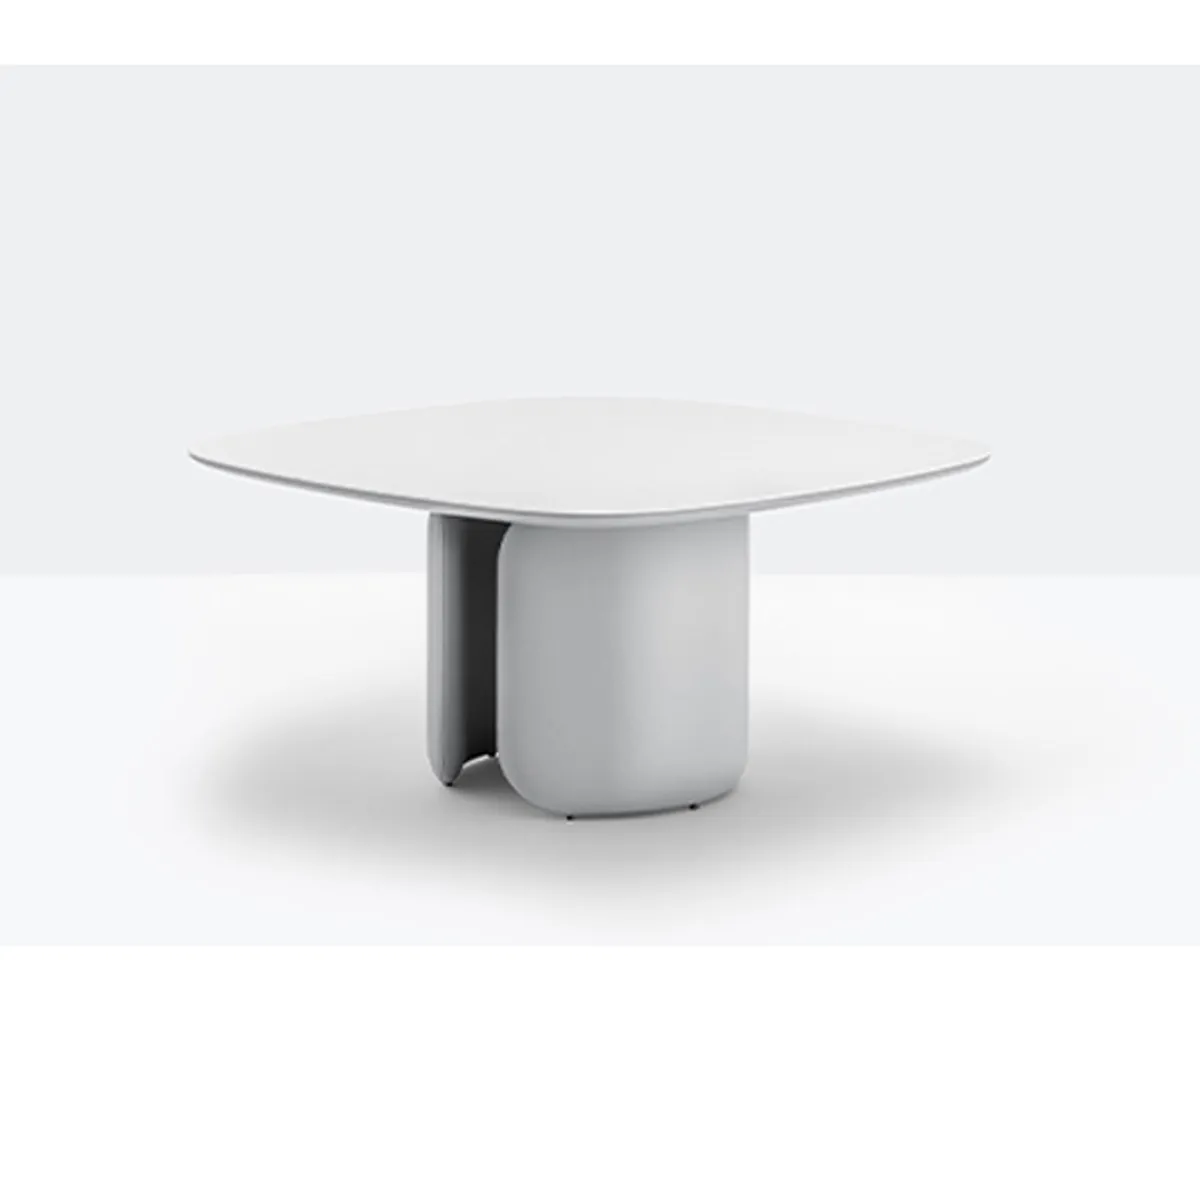 Elinor small table Inside Out Contracts6